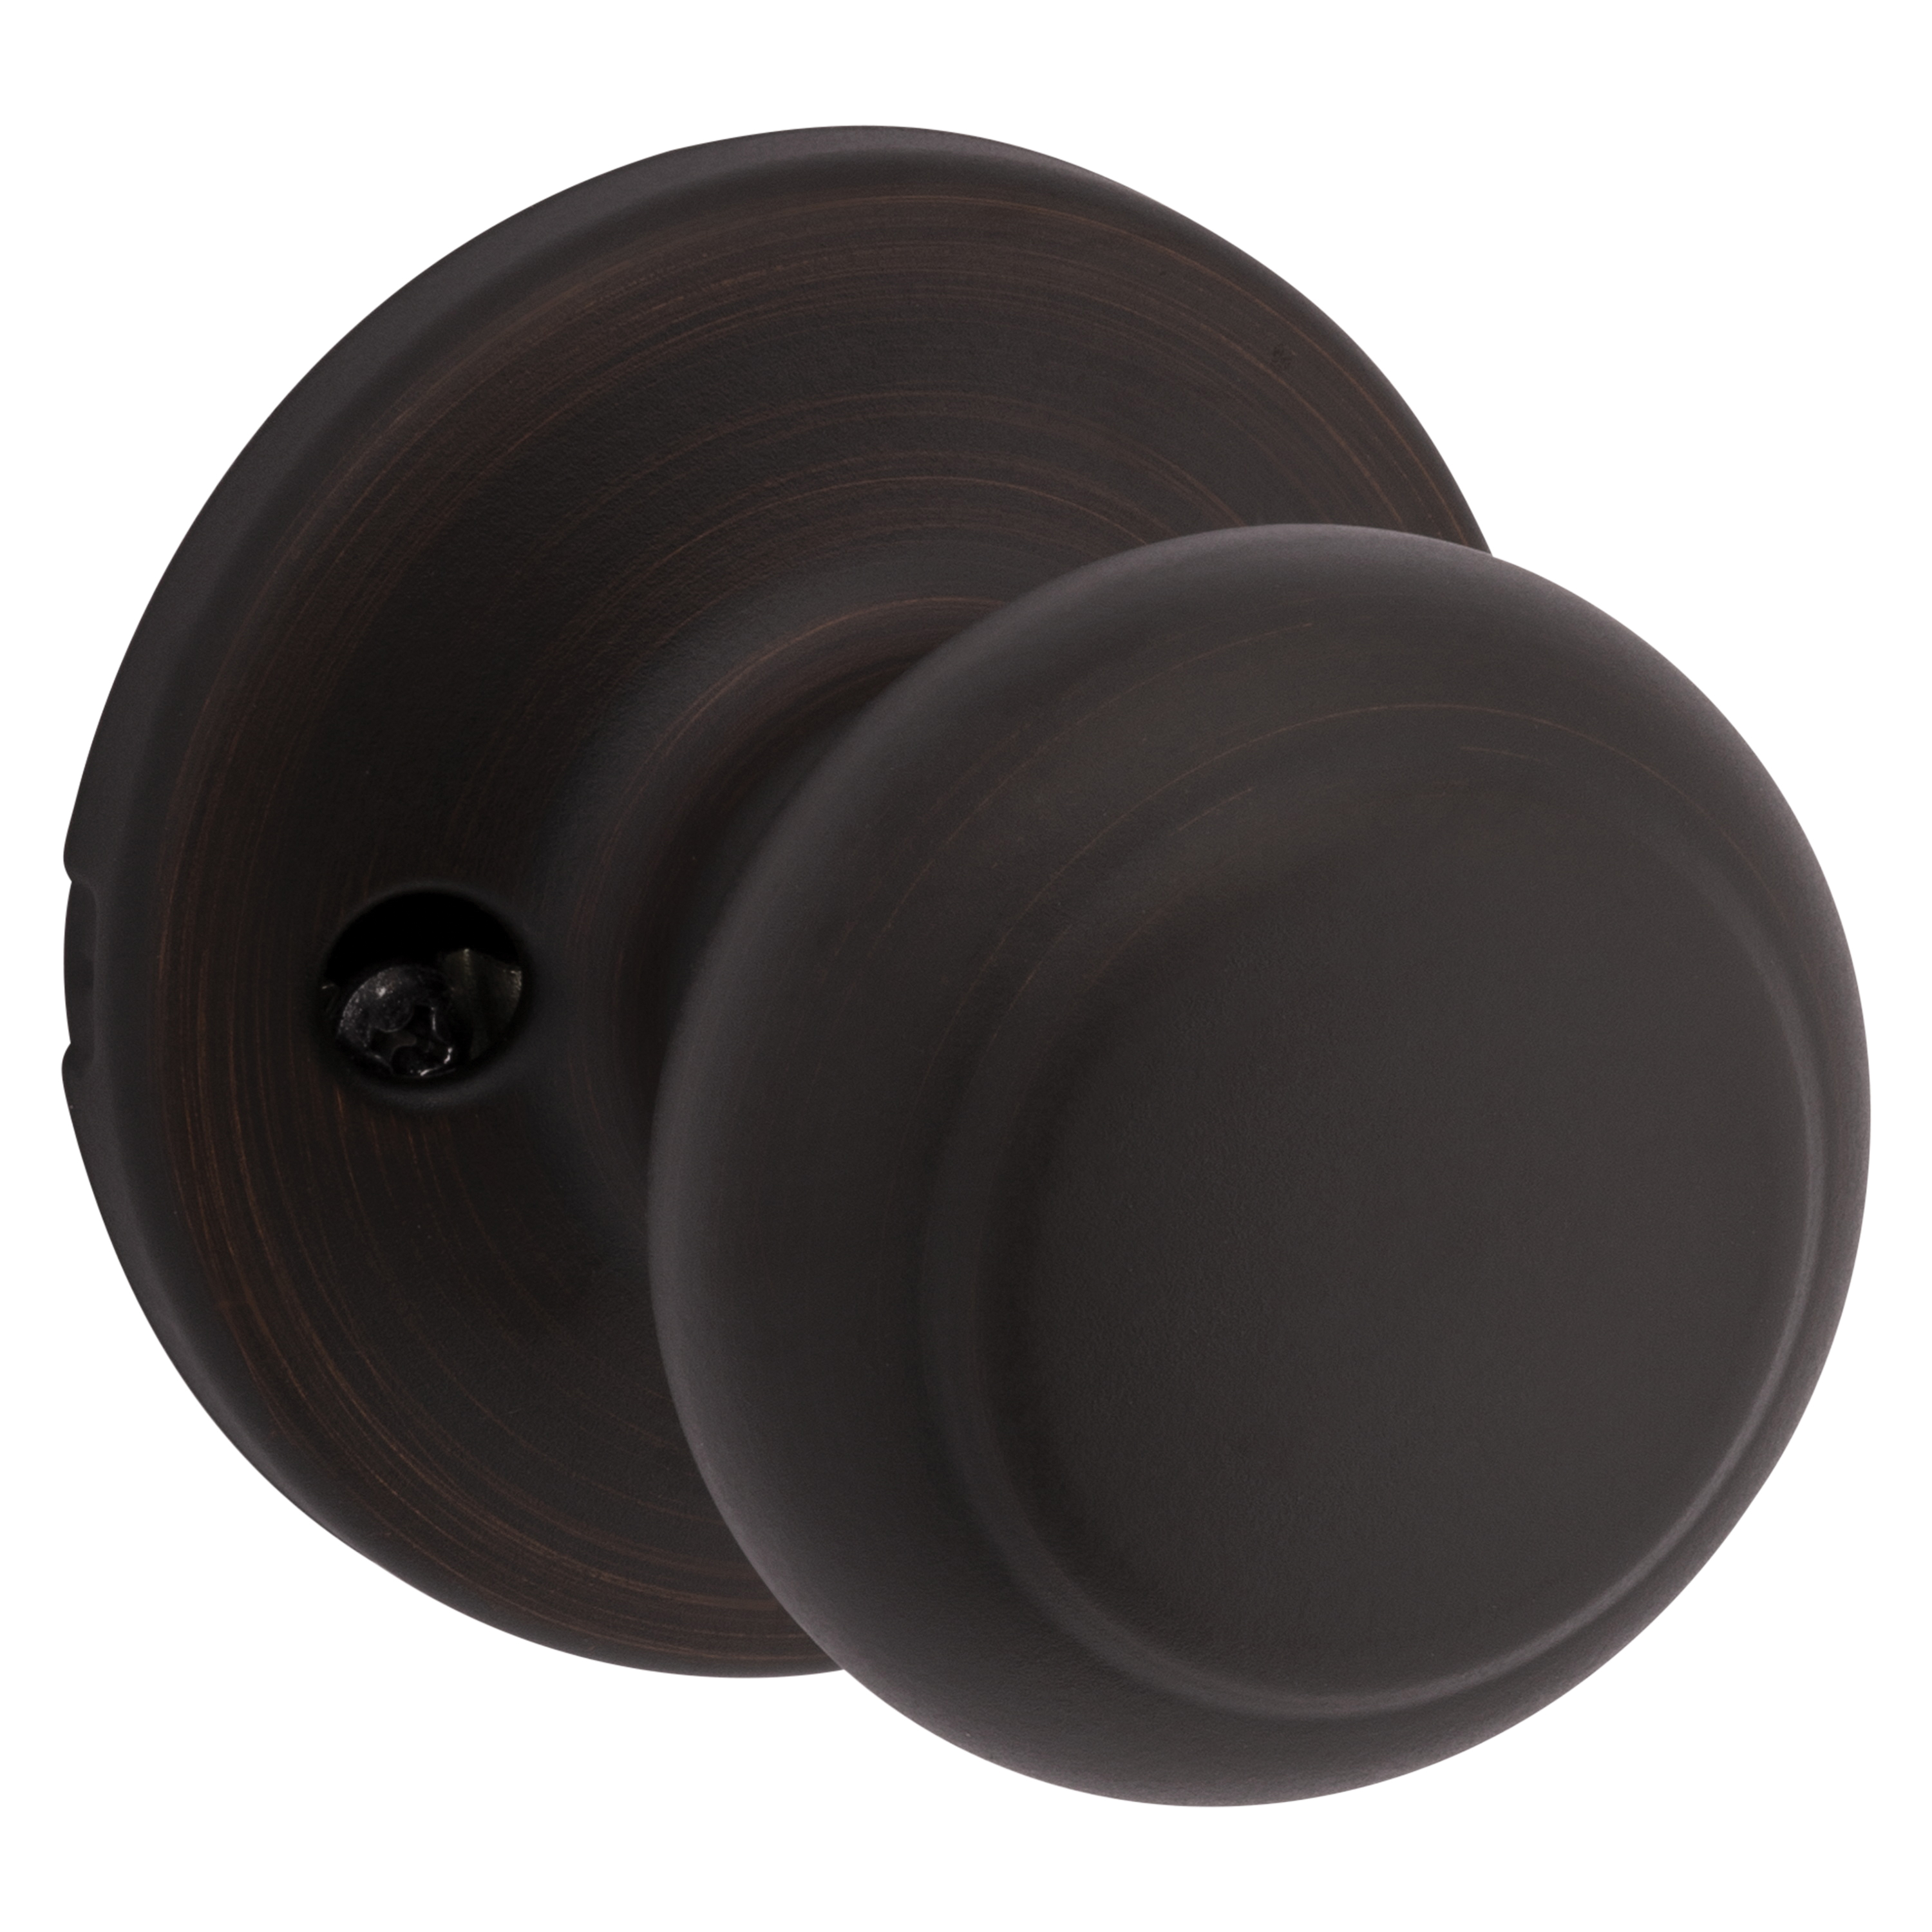 488CV 11P CP Dummy Knob, Cove Design, Venetian Bronze, For: Both Right Handed and Left Handed Doors